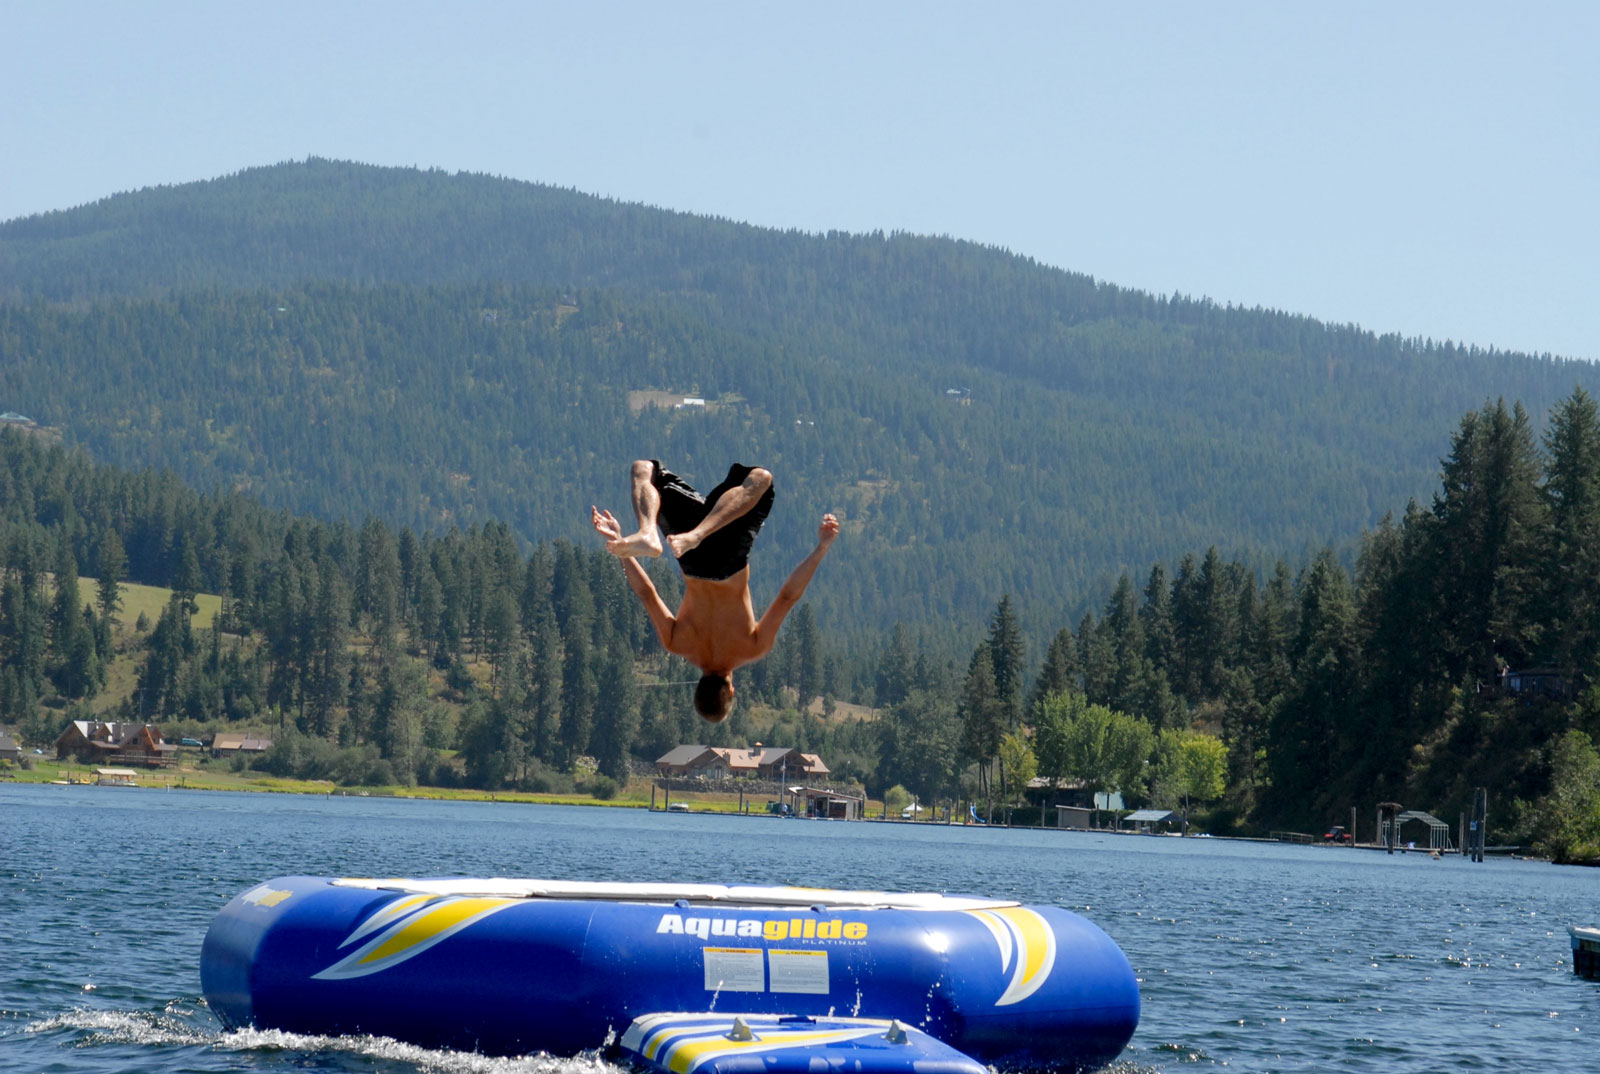 Water trampoline on Lake Coeur d'Alene | The Preserve at Gotham Bay